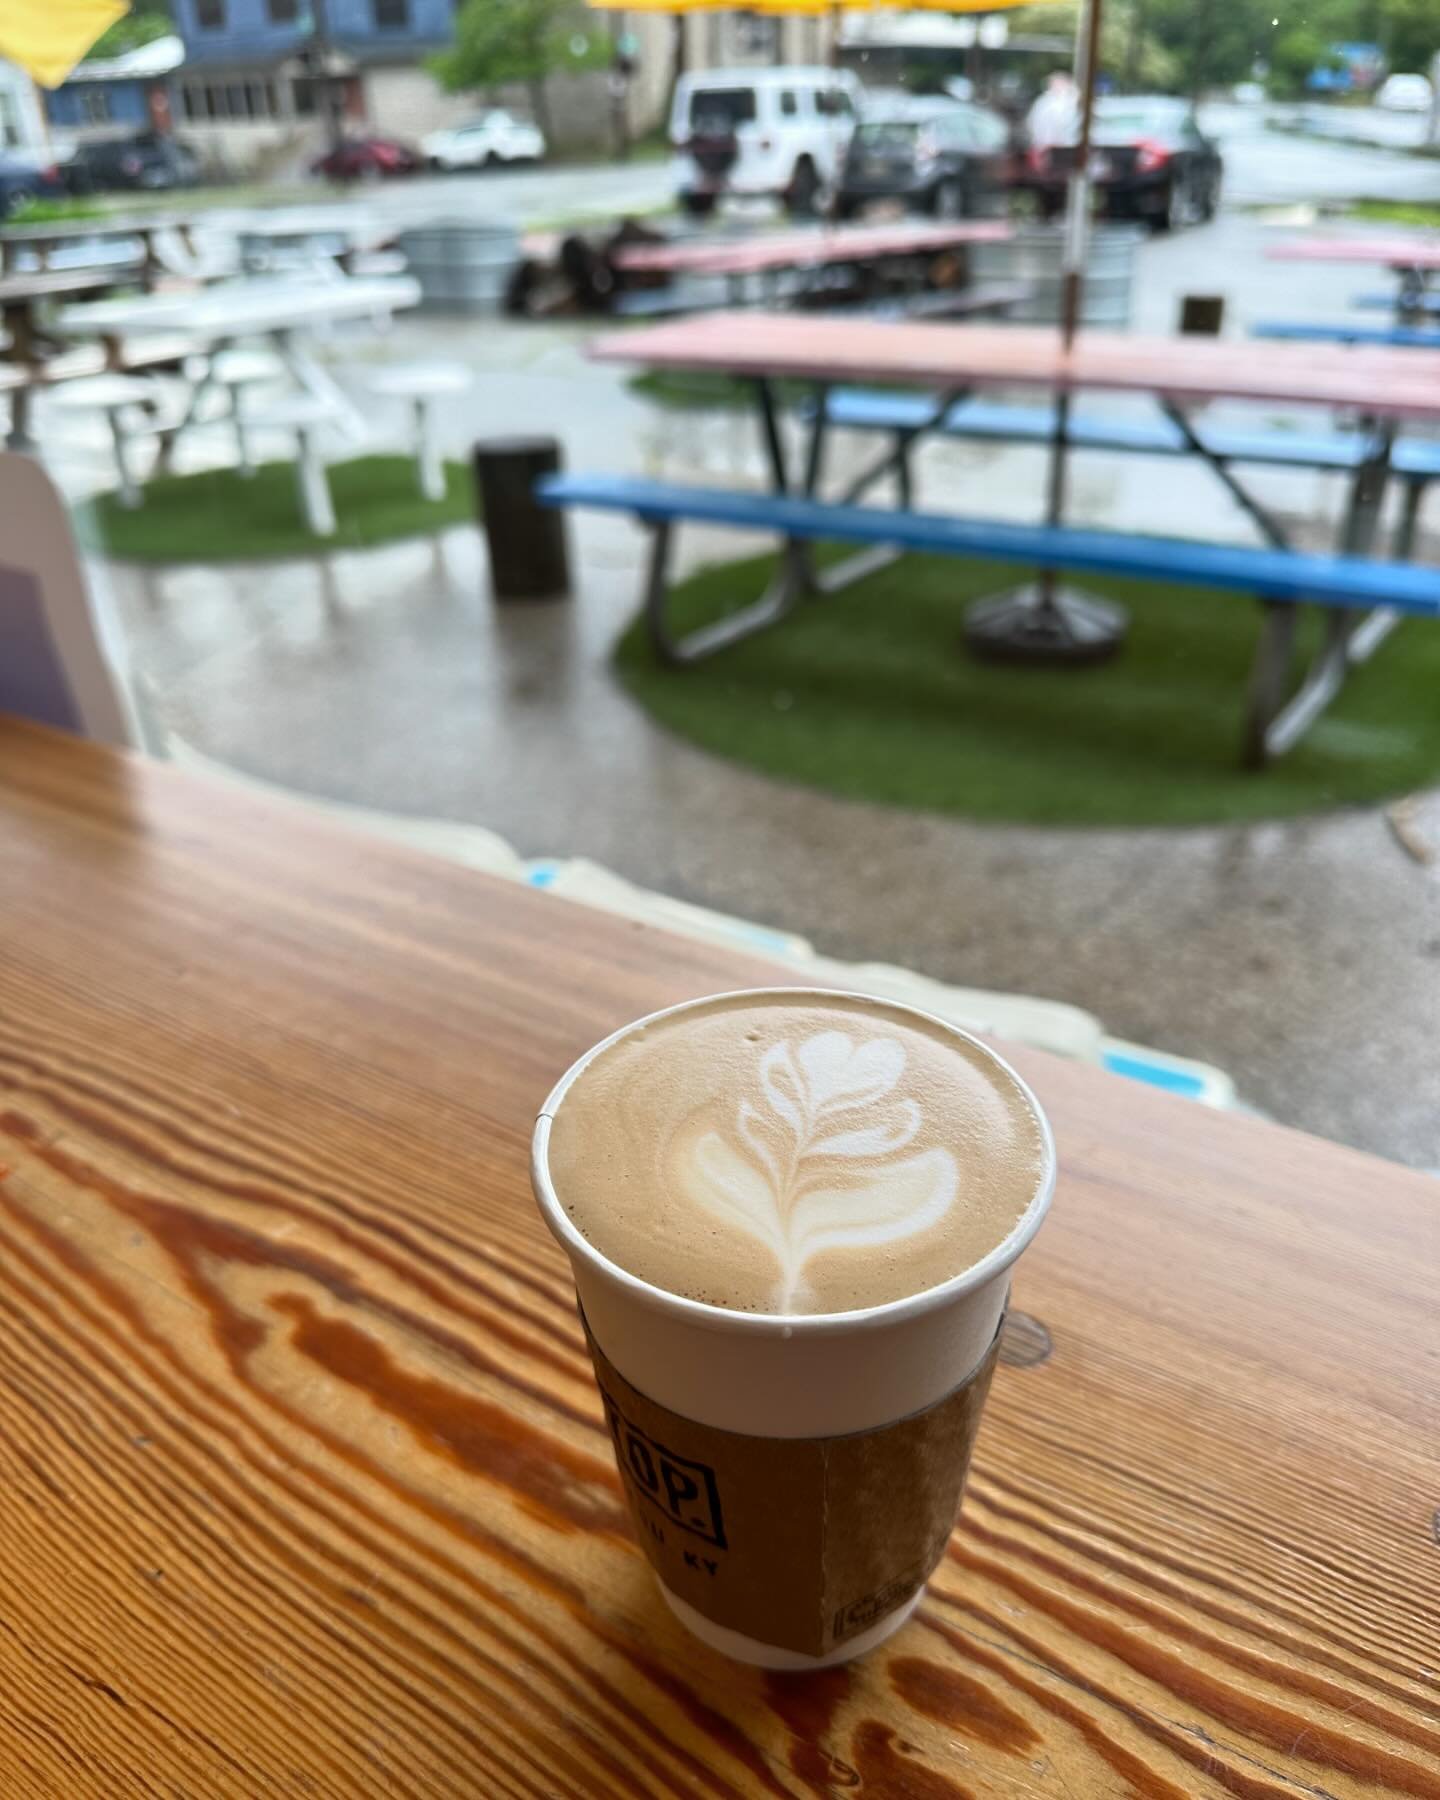 Rainy day cafe vibes in here today ☔️ come join us for a cozy brew!